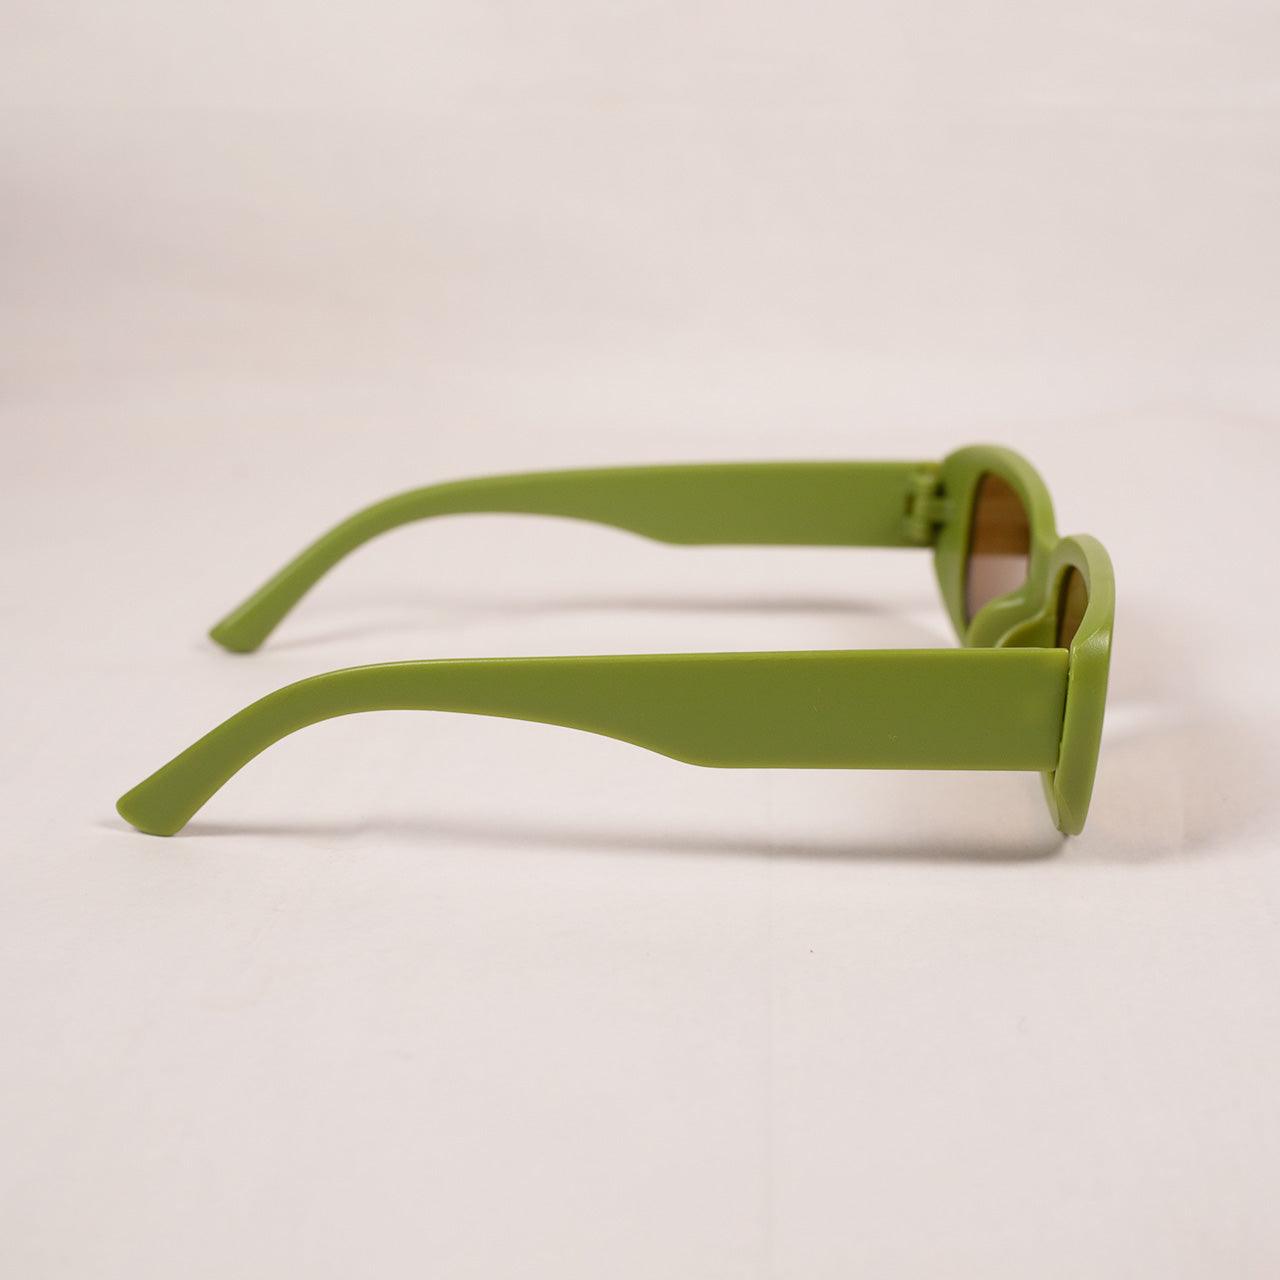 Green Rounded Rectangle Sunglasses